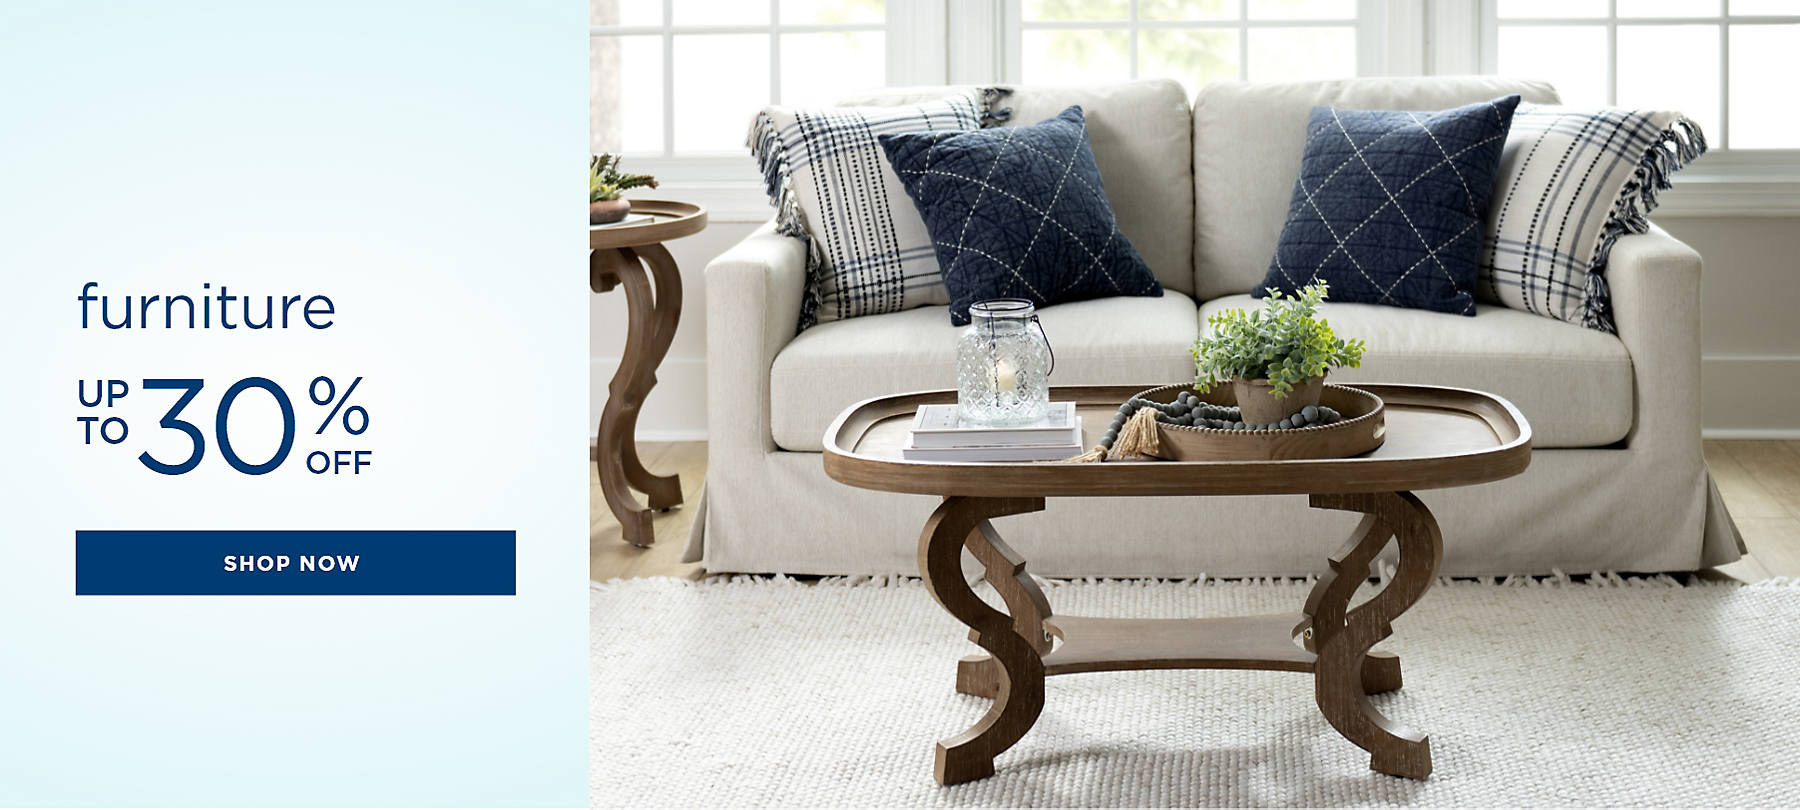 furniture up to 30% off shop now